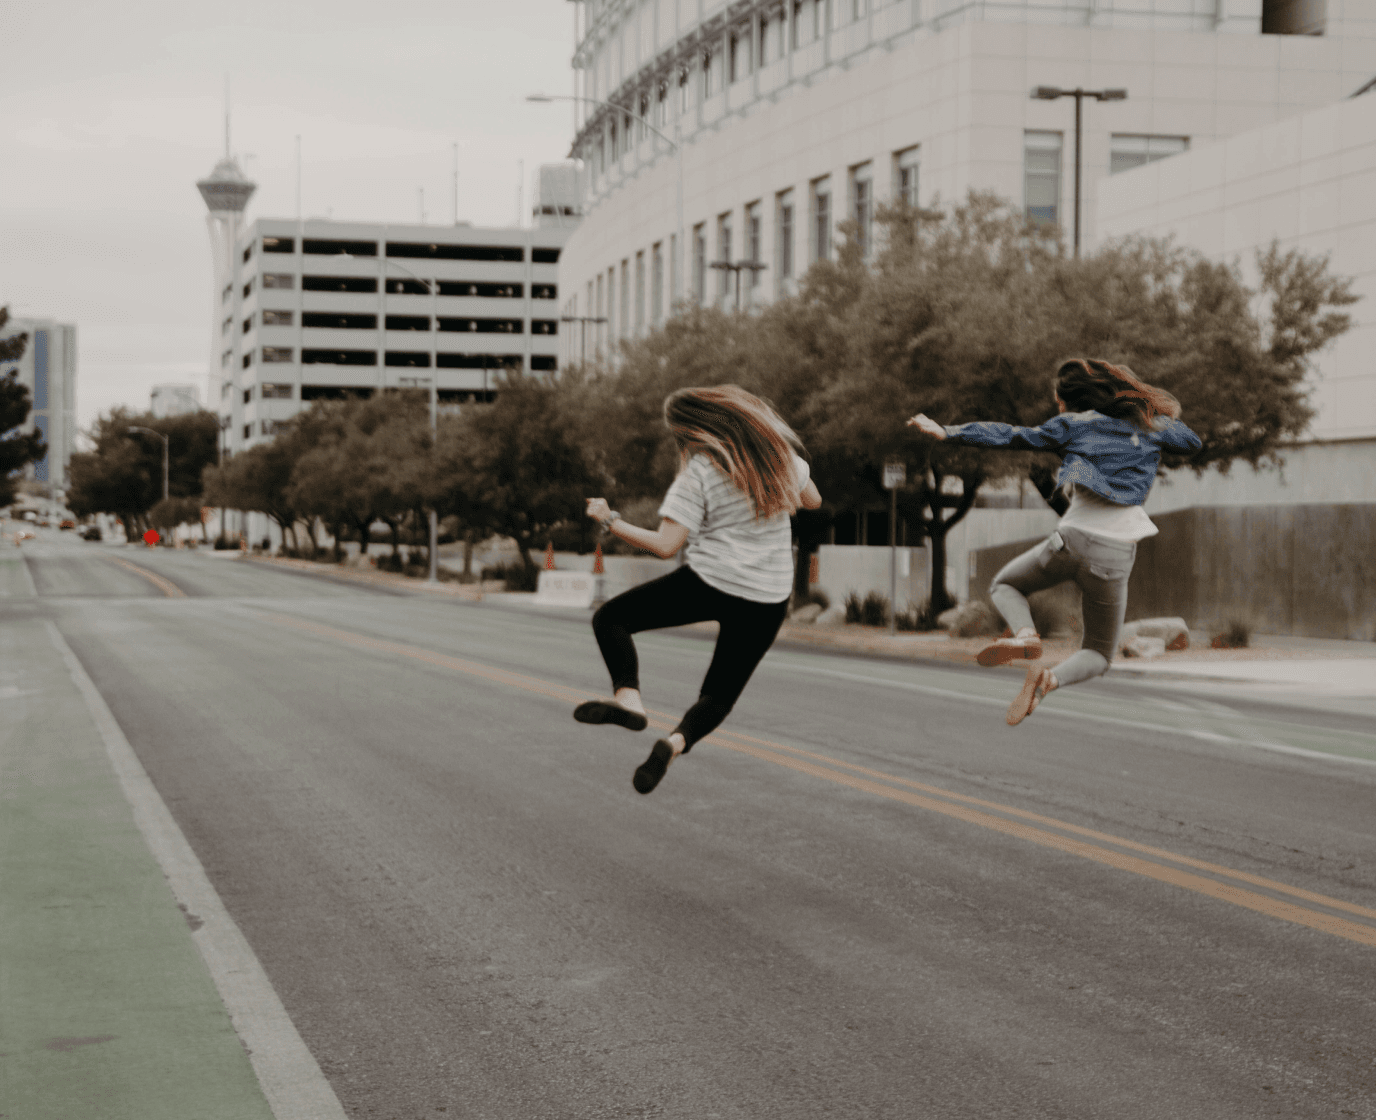 Vibrant image of two women energetically jumping on a street, symbolizing the welcoming and diverse environment at Spiky.